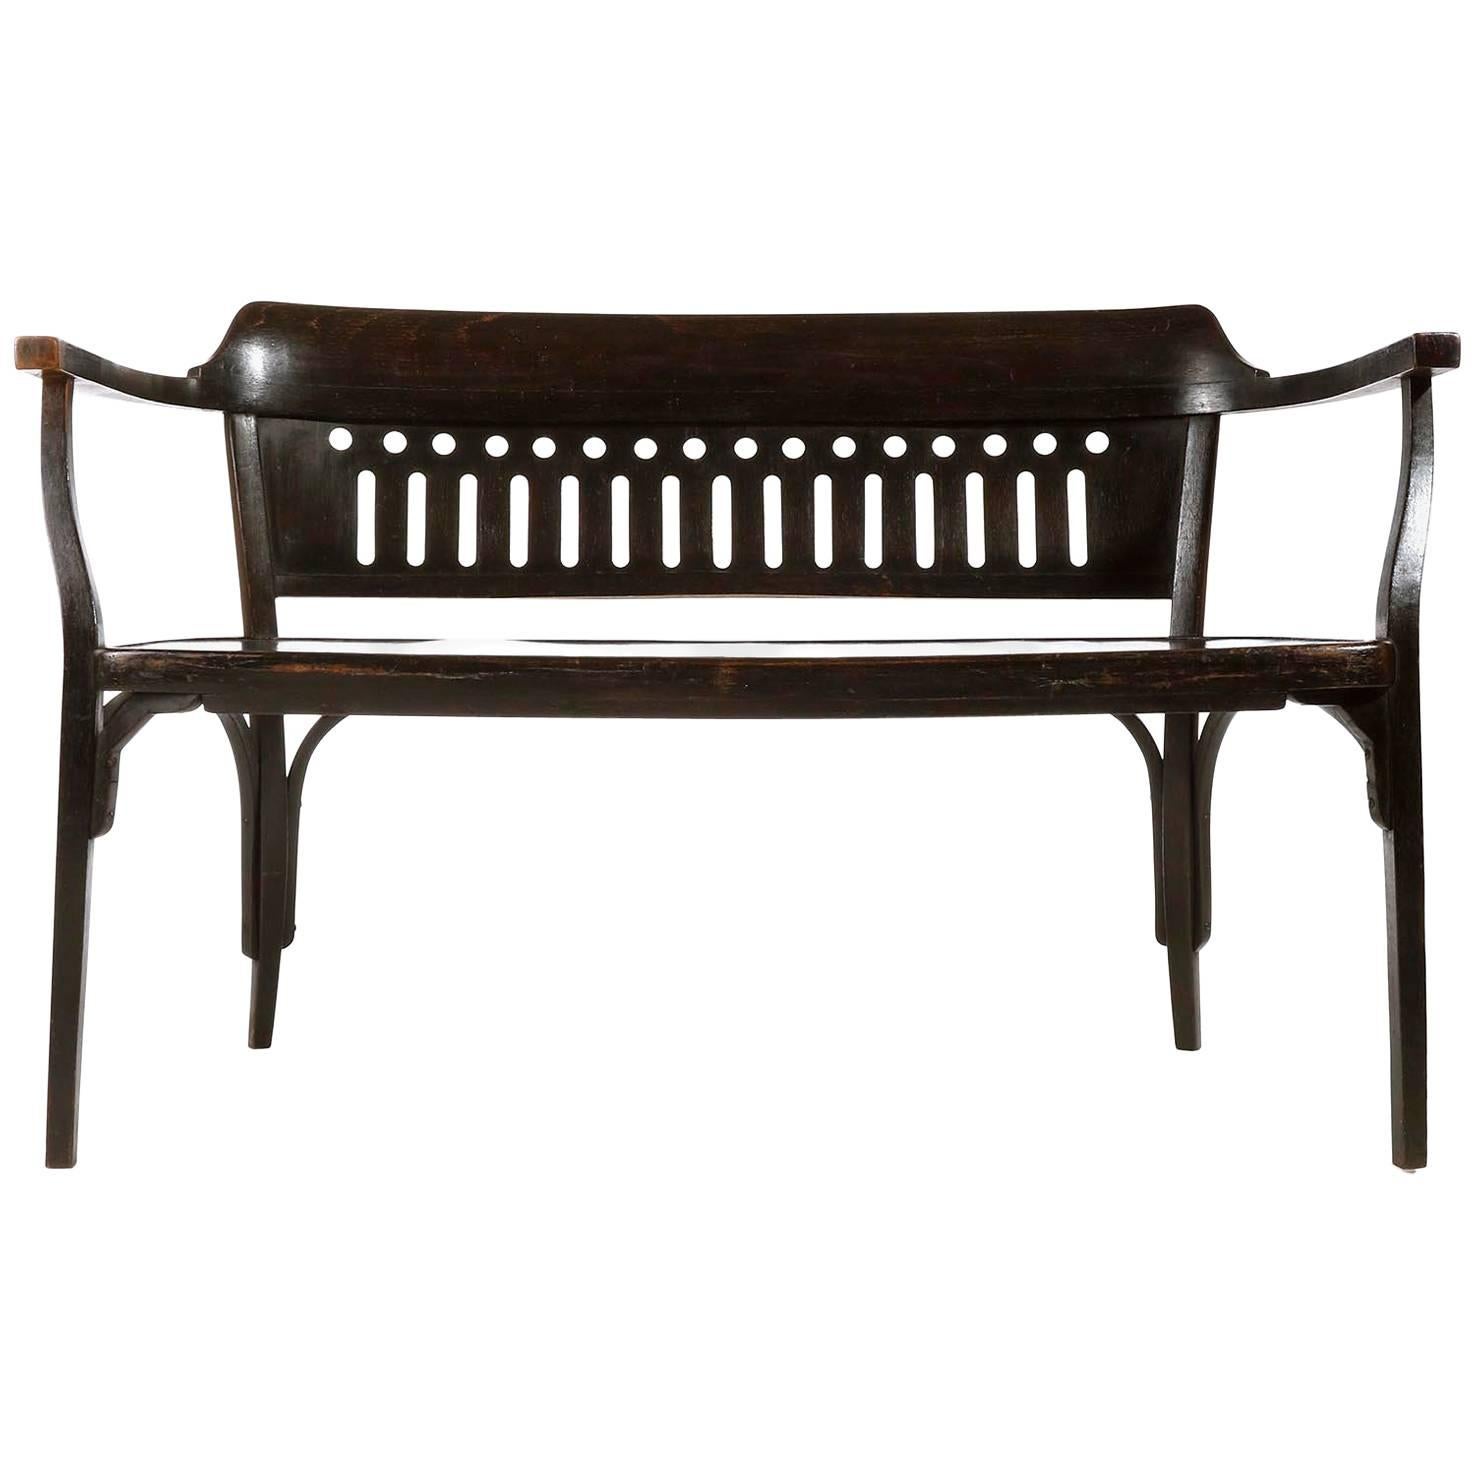 Otto Wagner Settee Bench by Thonet, Austria, Vienna Secession, circa 1905  For Sale at 1stDibs | otto wagner furniture